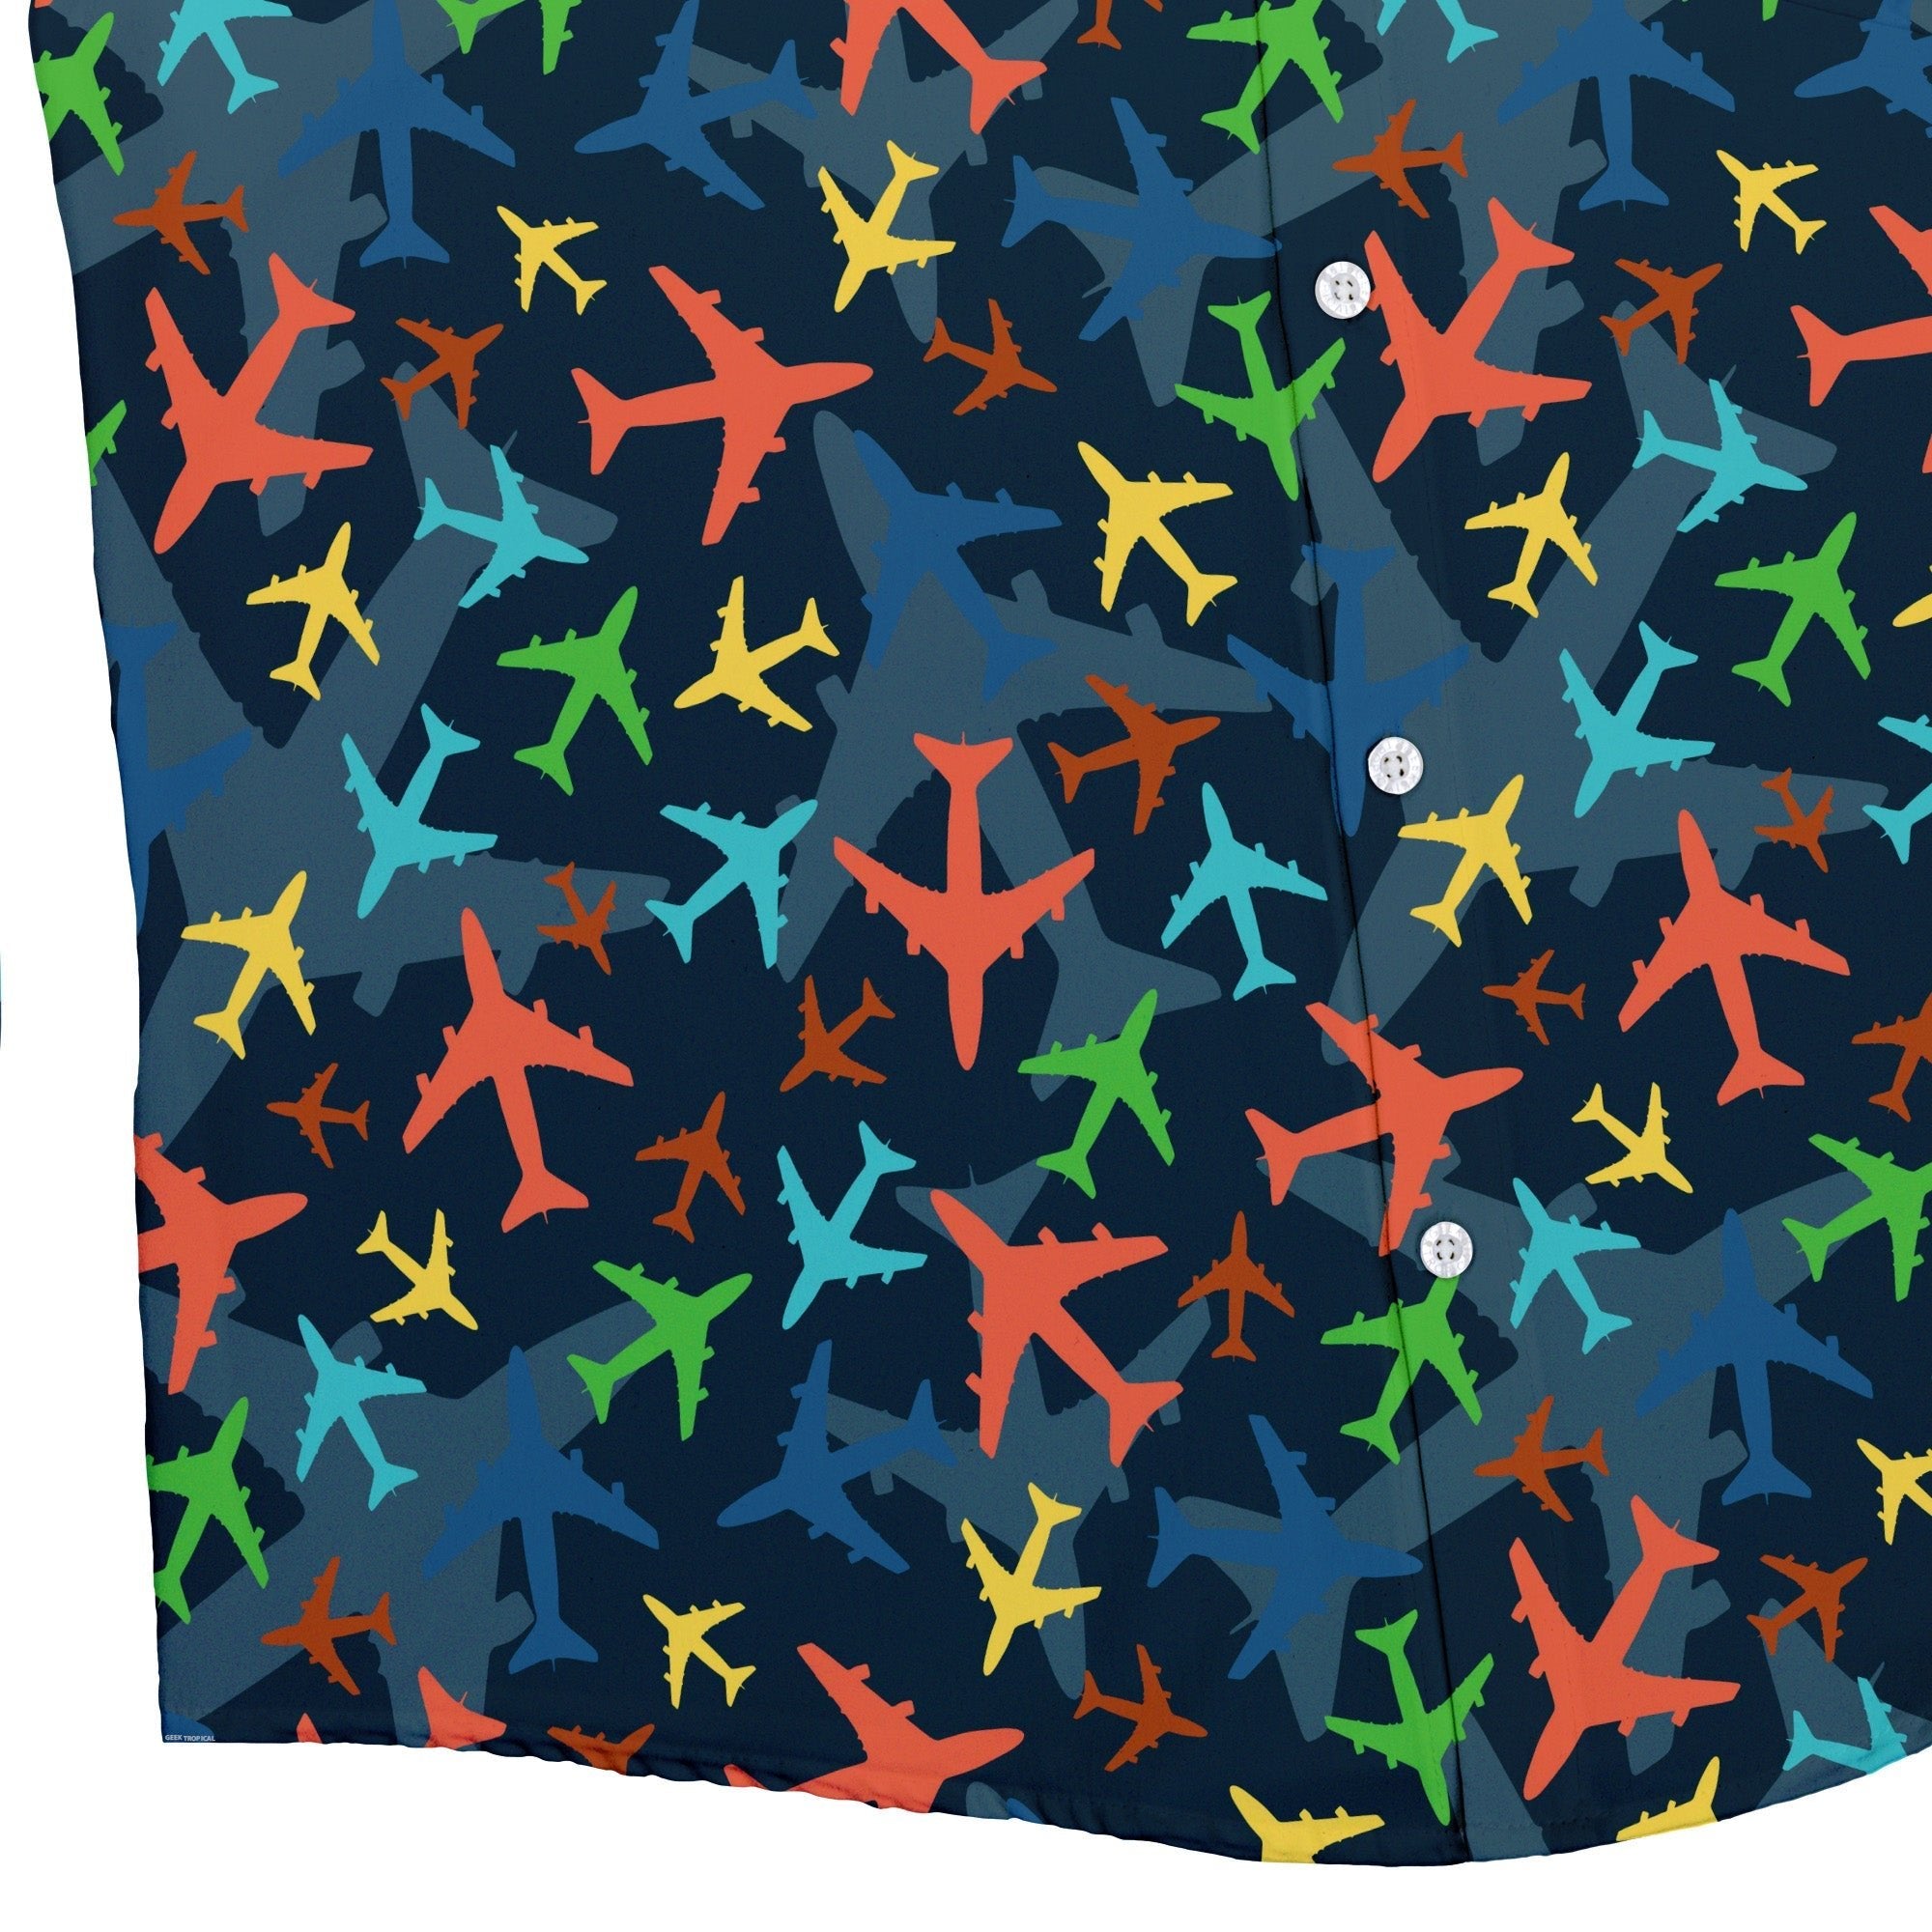 Multi Colored Airplanes on Blue Button Up Shirt - adult sizing - aviation print -